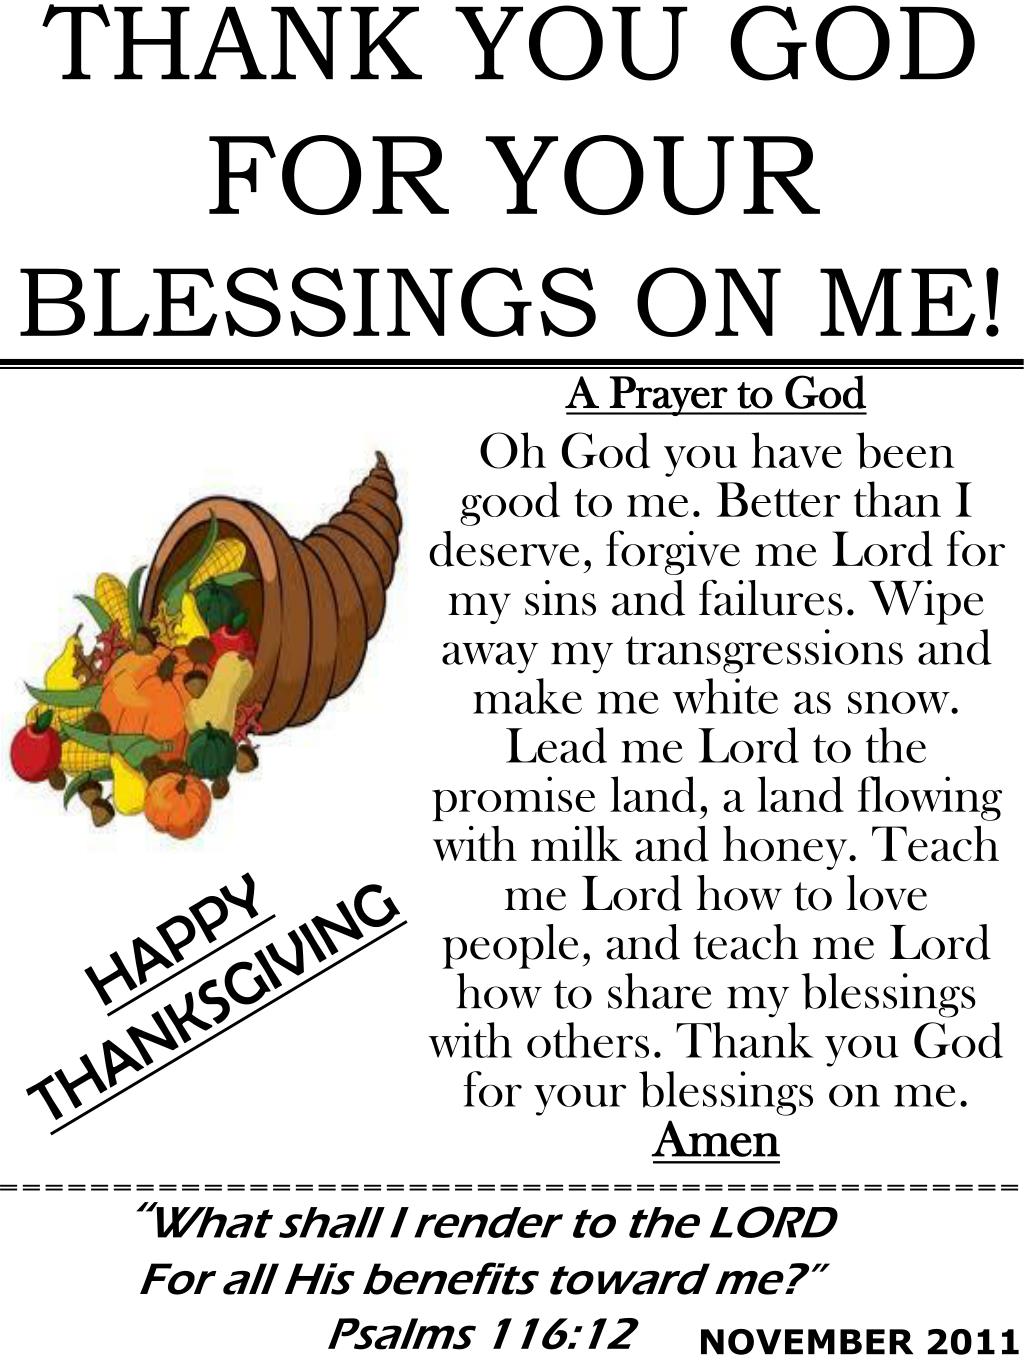 Ppt Thank You God For Your Blessings On Me Powerpoint Presentation Free Download Id